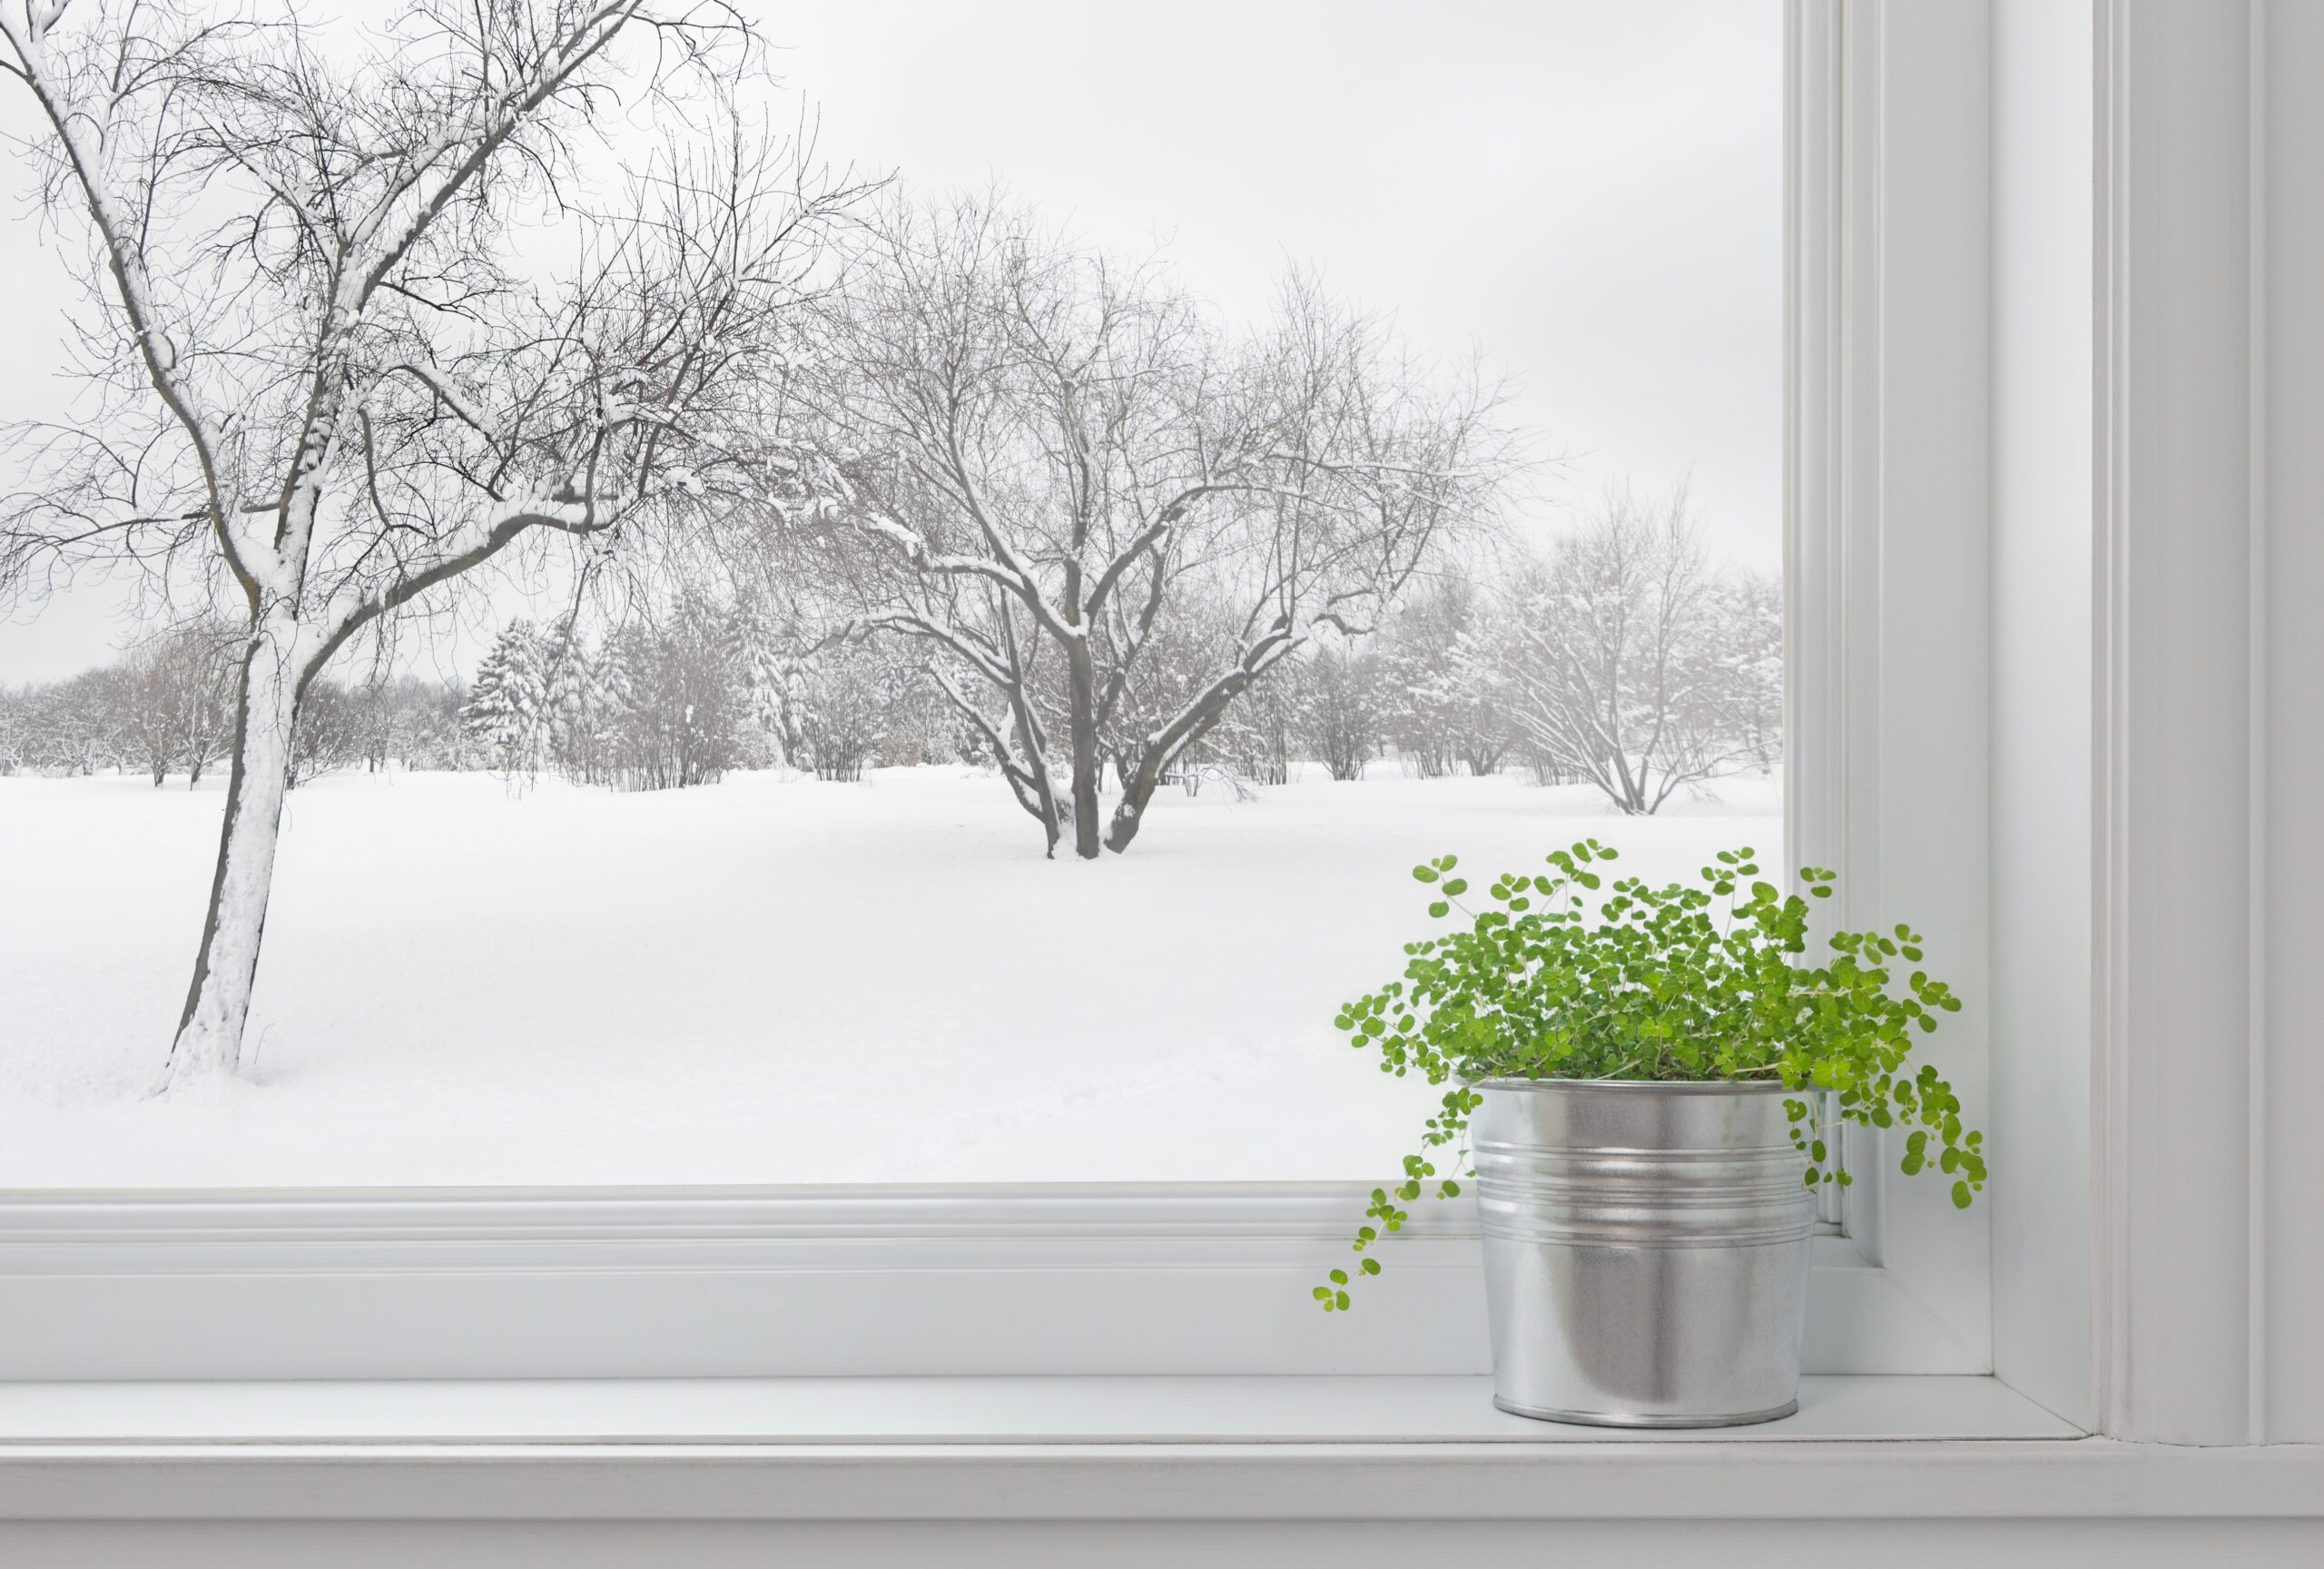 How to transport houseplants in cold weather